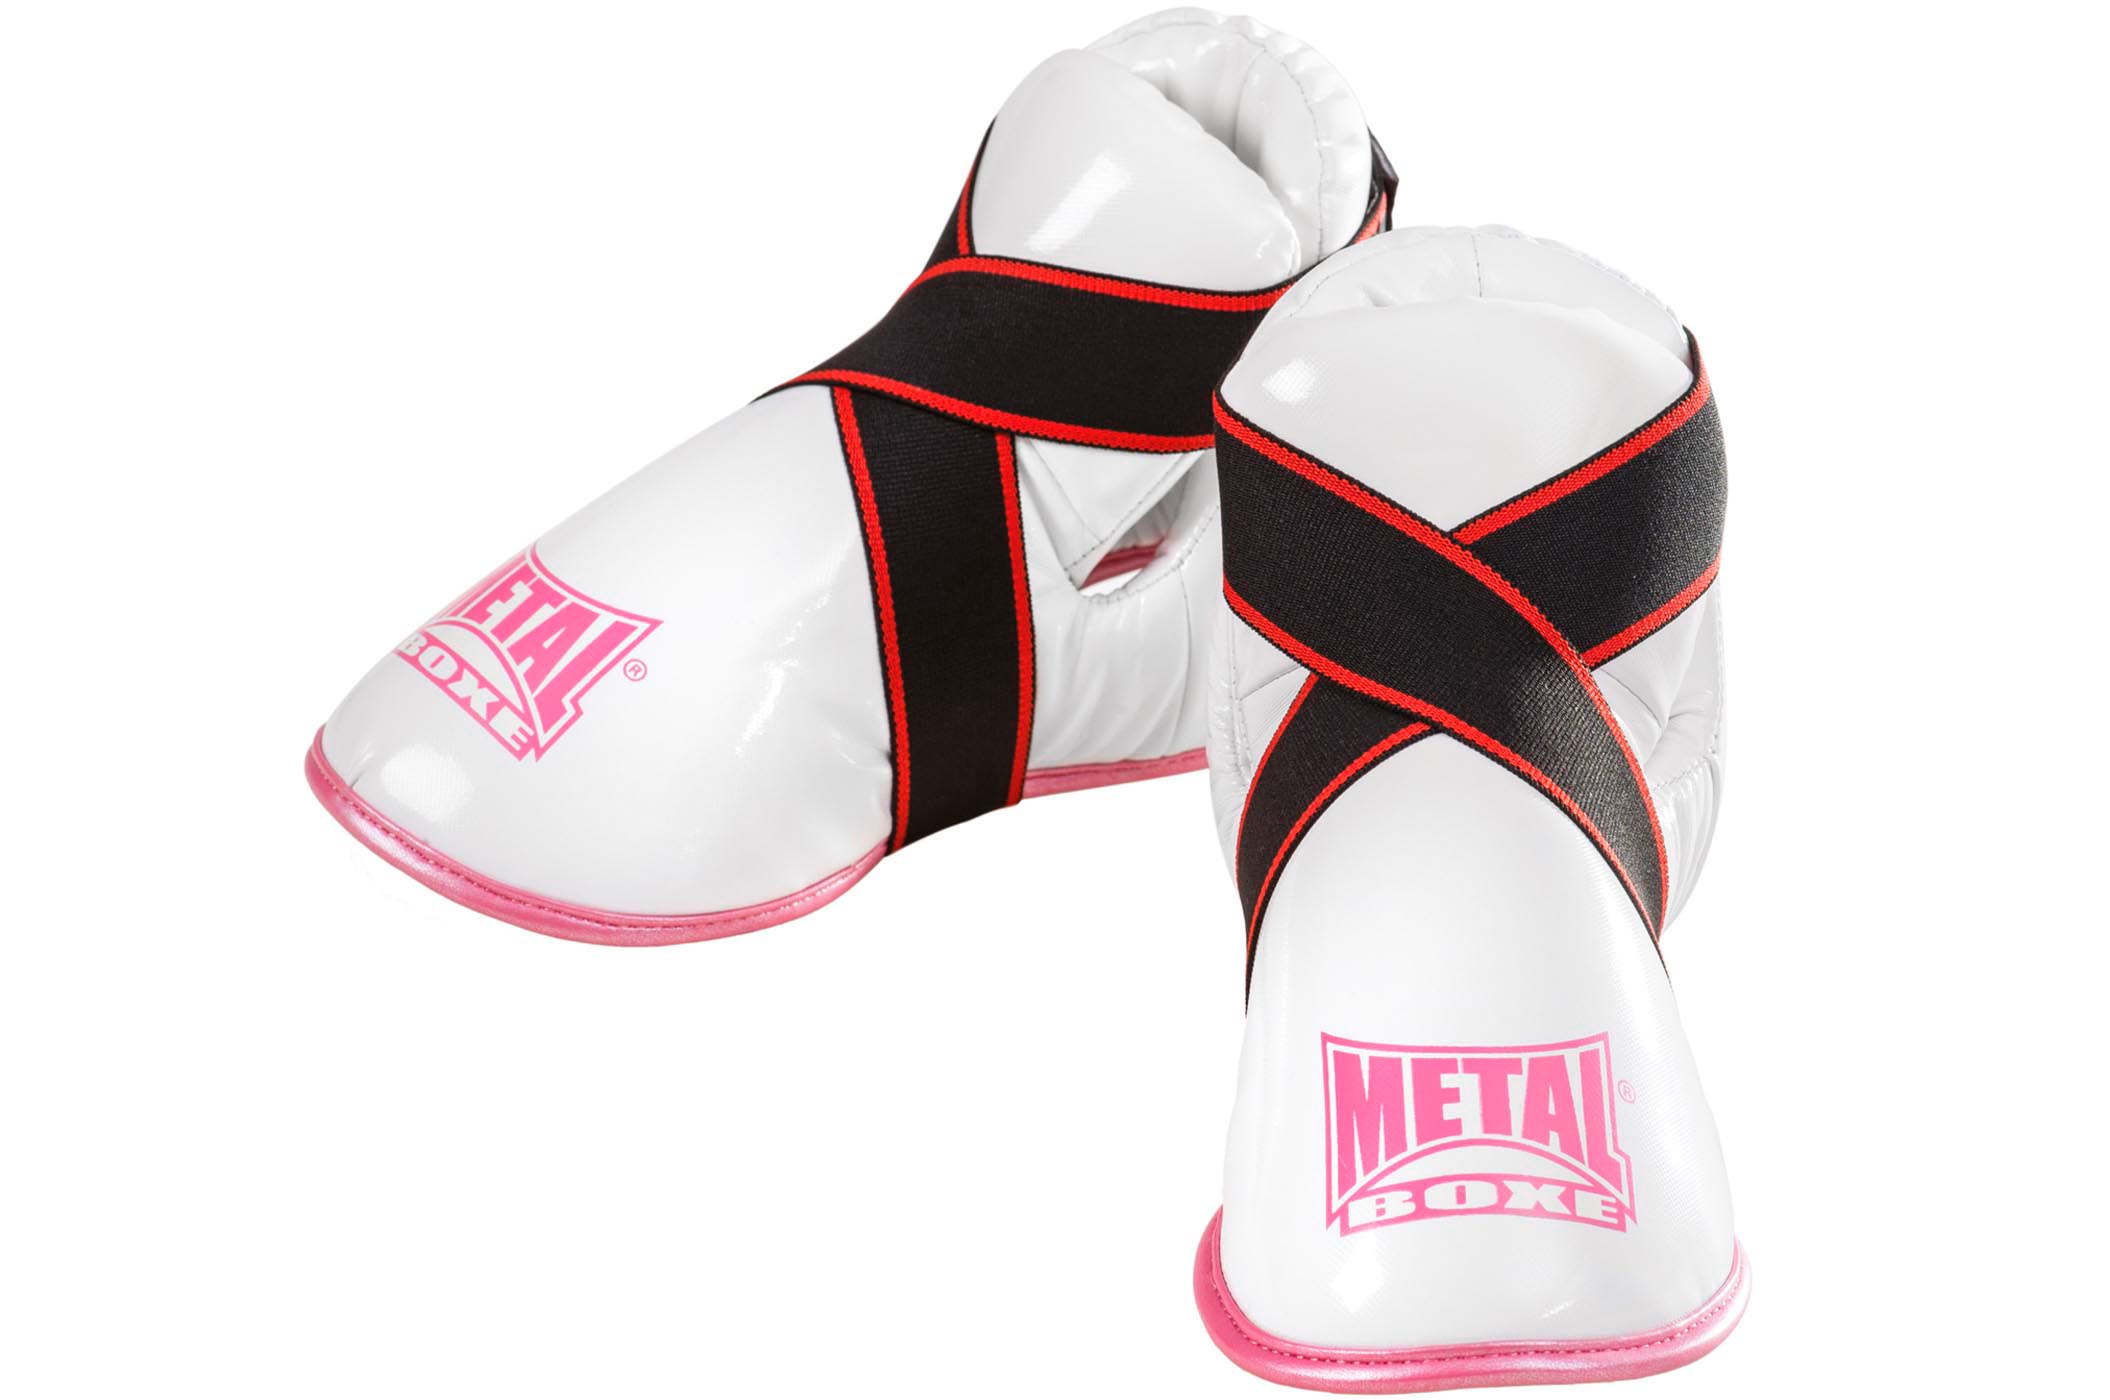 METAL BOXE Protège Pied Full Contact Enfant